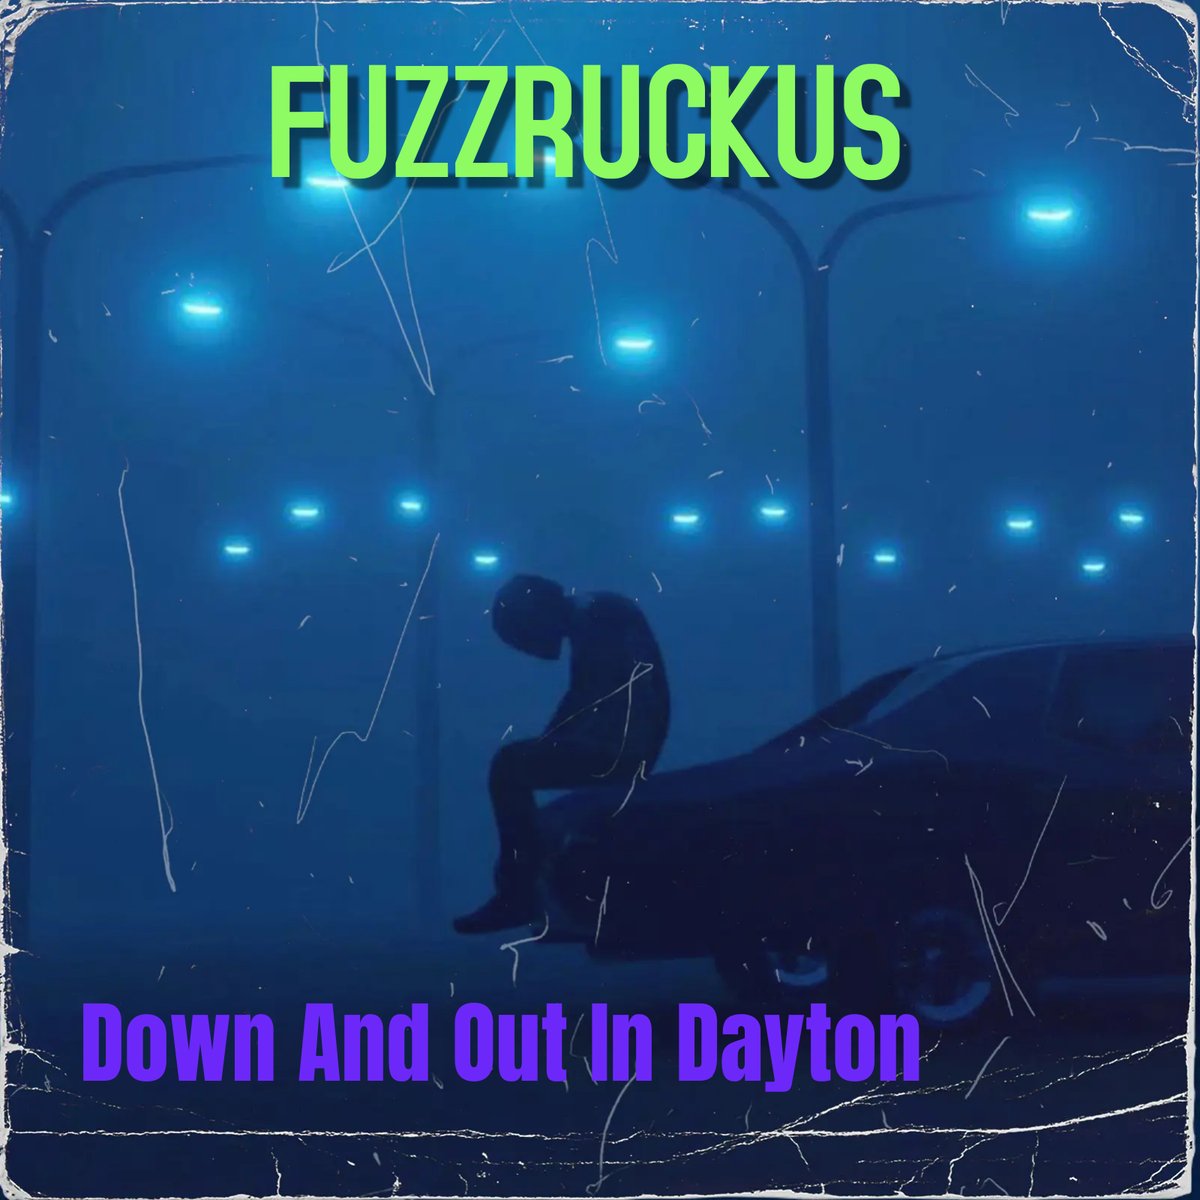 One week from today, the new Fuzzruckus single 'Down And Out In Dayton' will be streaming everywhere. If the distributor gets it approved in time. 🤷‍♂️ If not, guess it will be at least on Bandcamp next week. Either way, it will be available in one week!